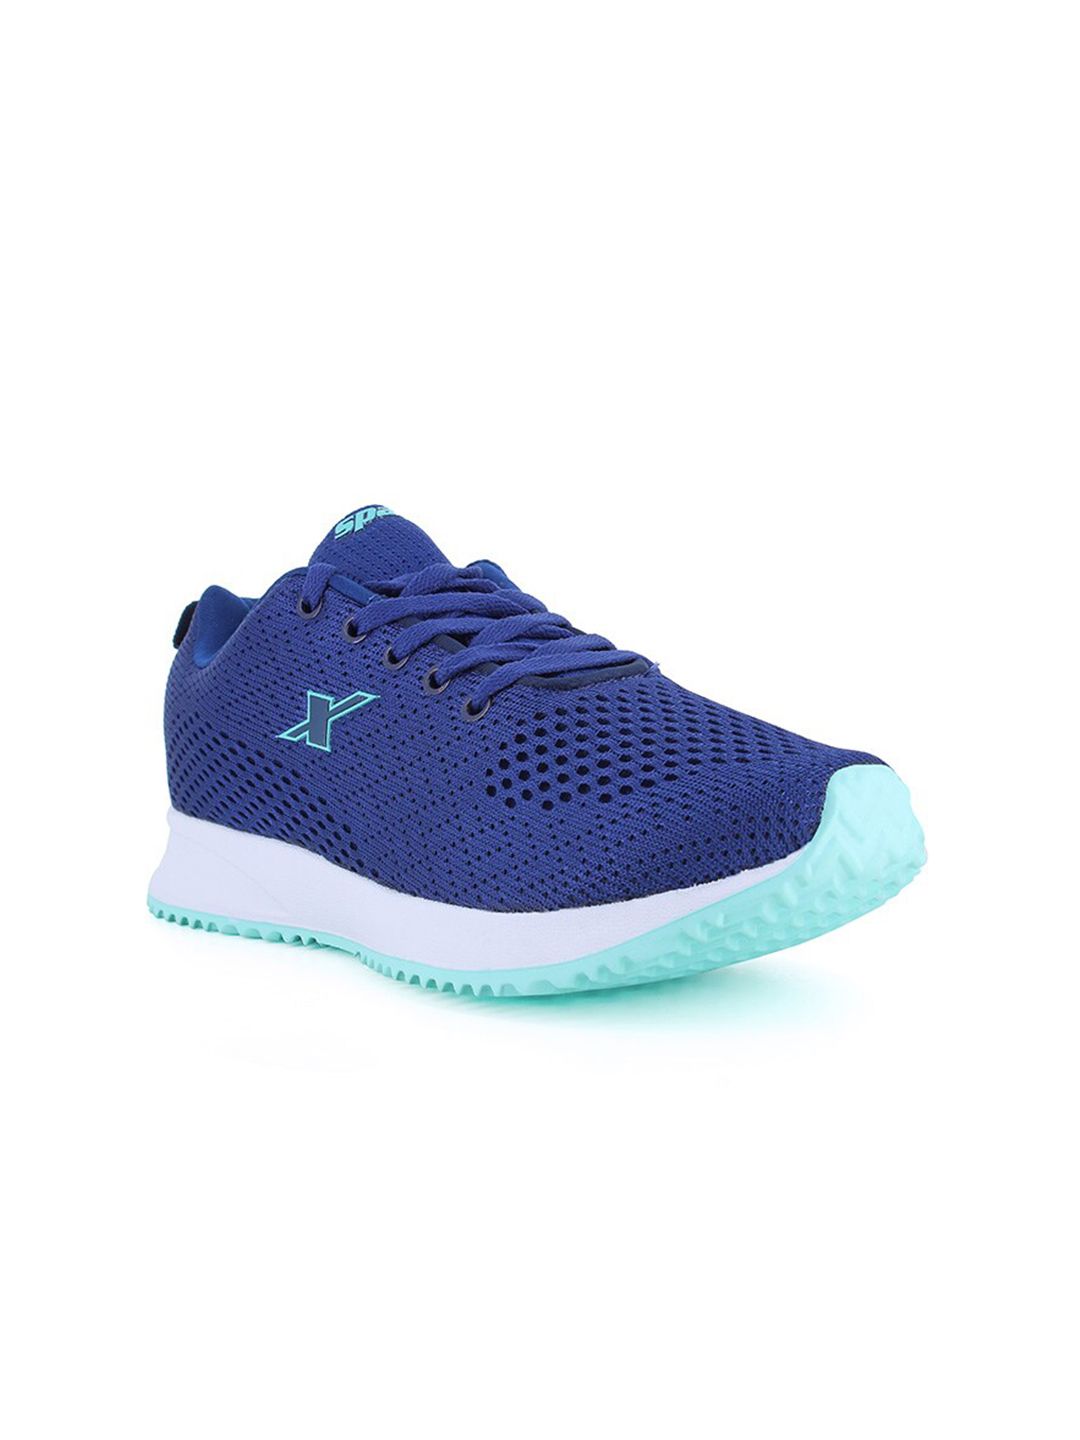 Sparx Women Blue Textile Running Non-Marking Shoes Price in India